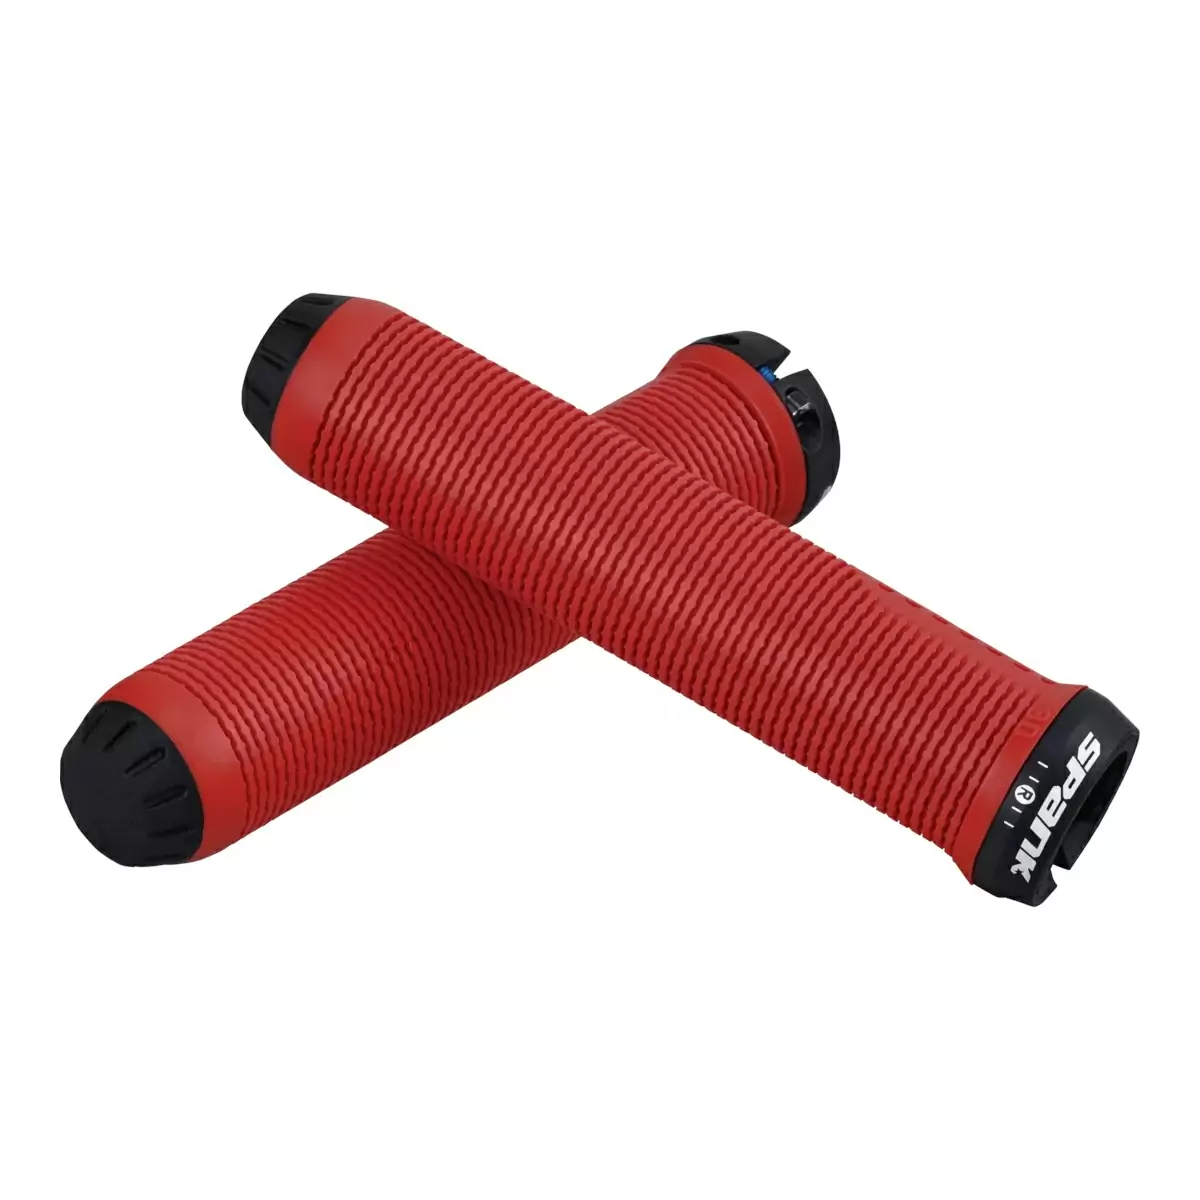 Spike 30 Lock-on Grips 30mm x 145mm Red - image